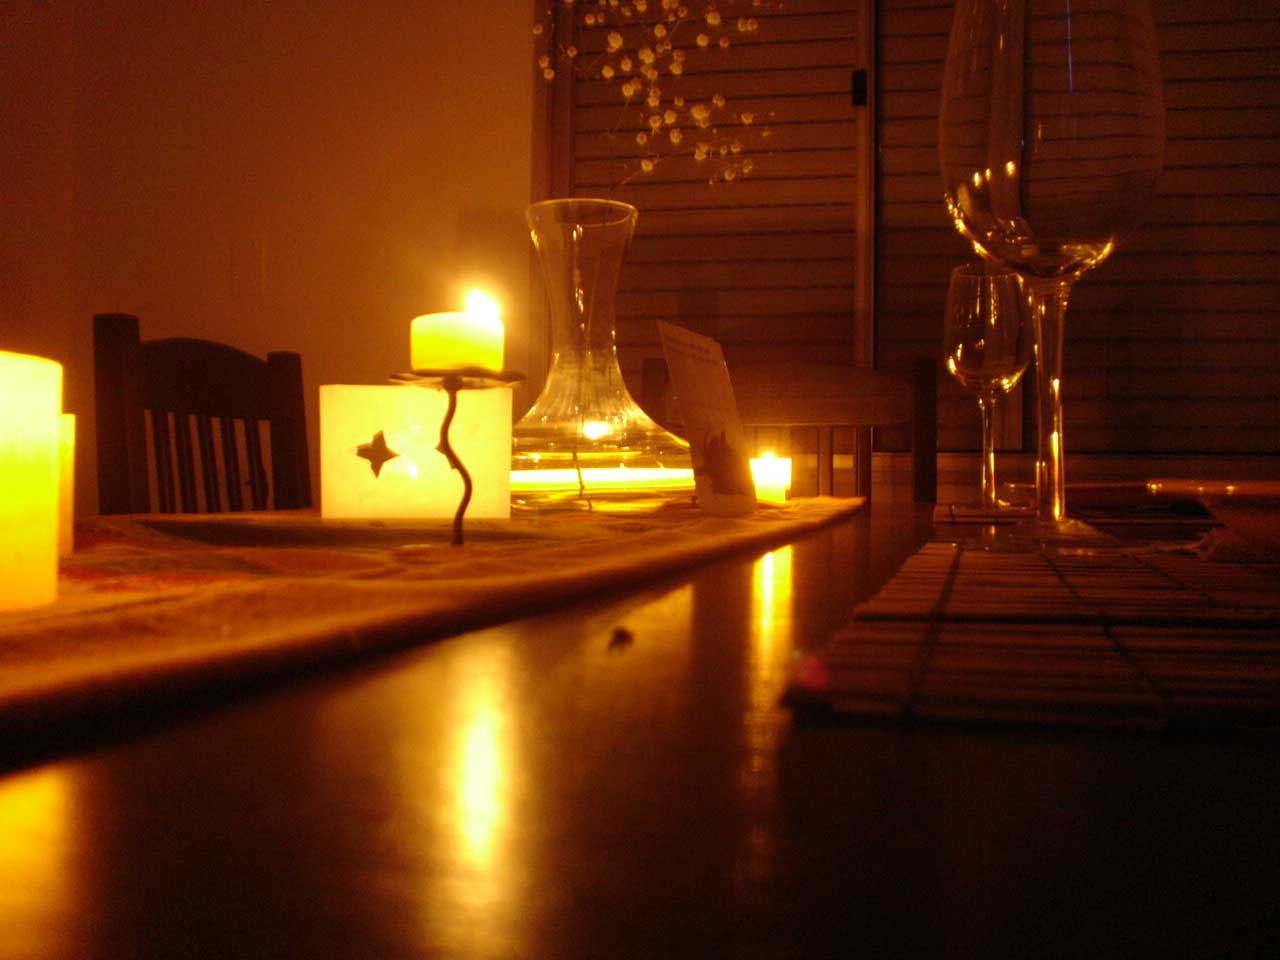 the interior of a dimly lit room with candles, furniture and window shutters